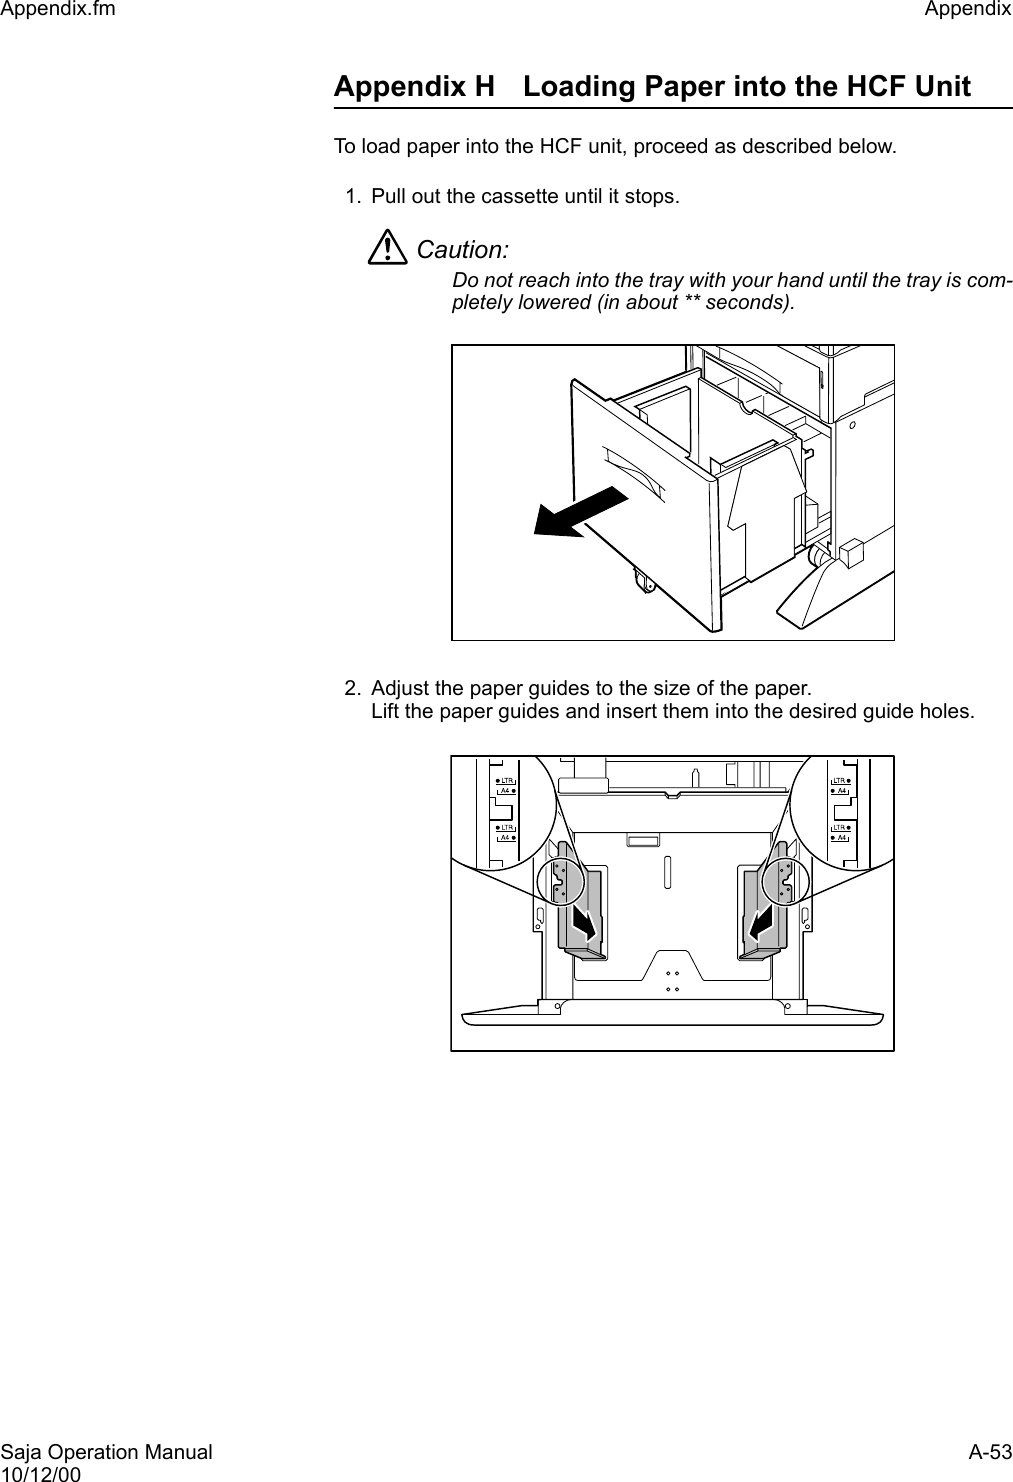 Saja Operation Manual A-5310/12/00Appendix.fm Appendix Appendix H Loading Paper into the HCF UnitTo load paper into the HCF unit, proceed as described below.1. Pull out the cassette until it stops.Caution: Do not reach into the tray with your hand until the tray is com-pletely lowered (in about ** seconds).2. Adjust the paper guides to the size of the paper. Lift the paper guides and insert them into the desired guide holes. 